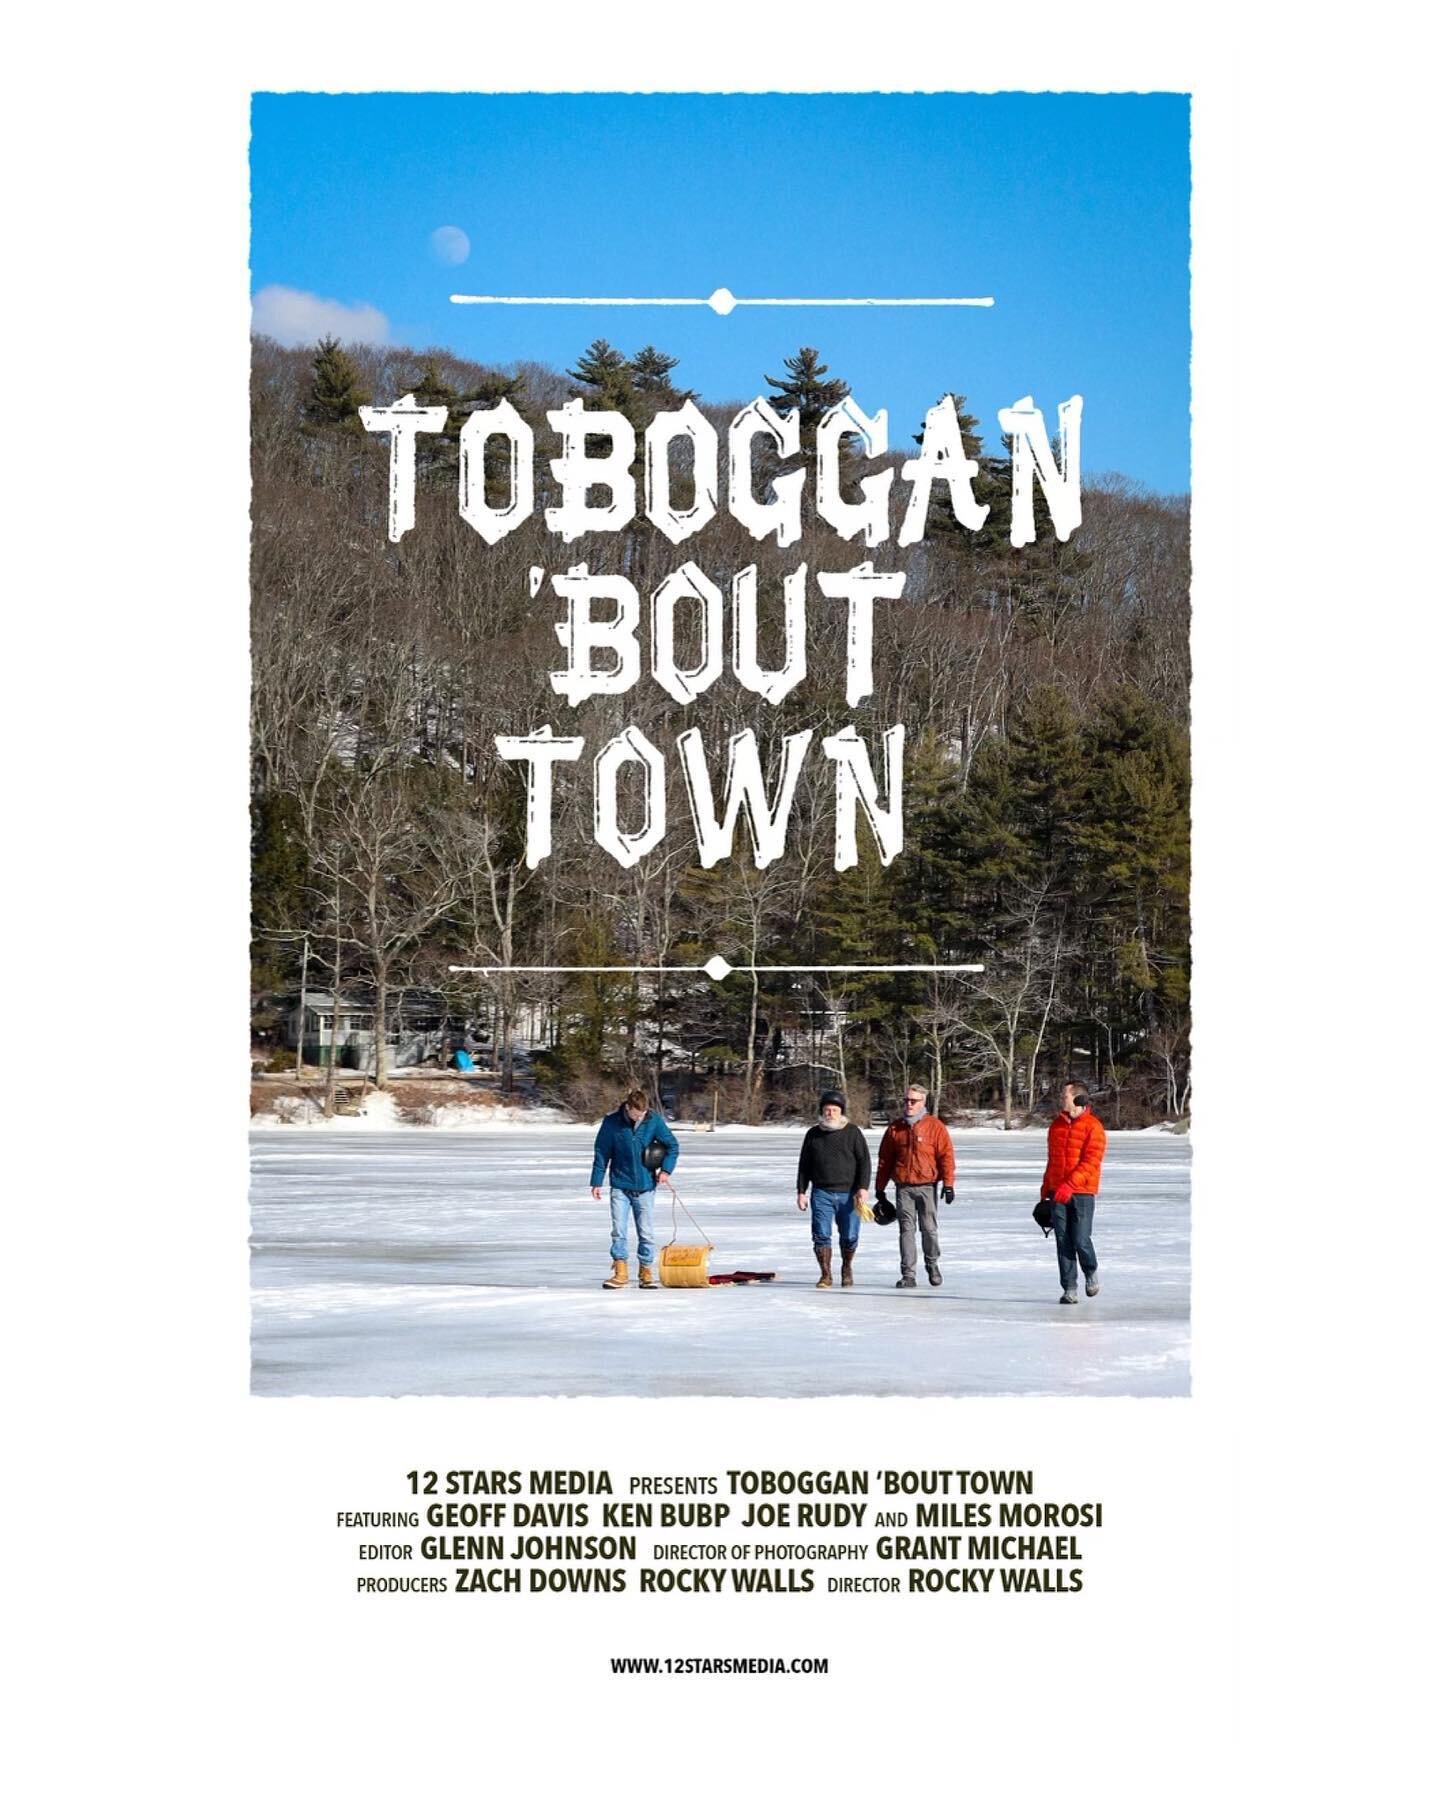 Introducing the official poster for our latest short film, Toboggan &lsquo;Bout Town.

Four friends rally their hometown of Noblesville, Indiana to help them build a ten foot toboggan and send them to race in the US National Toboggan Championship in 